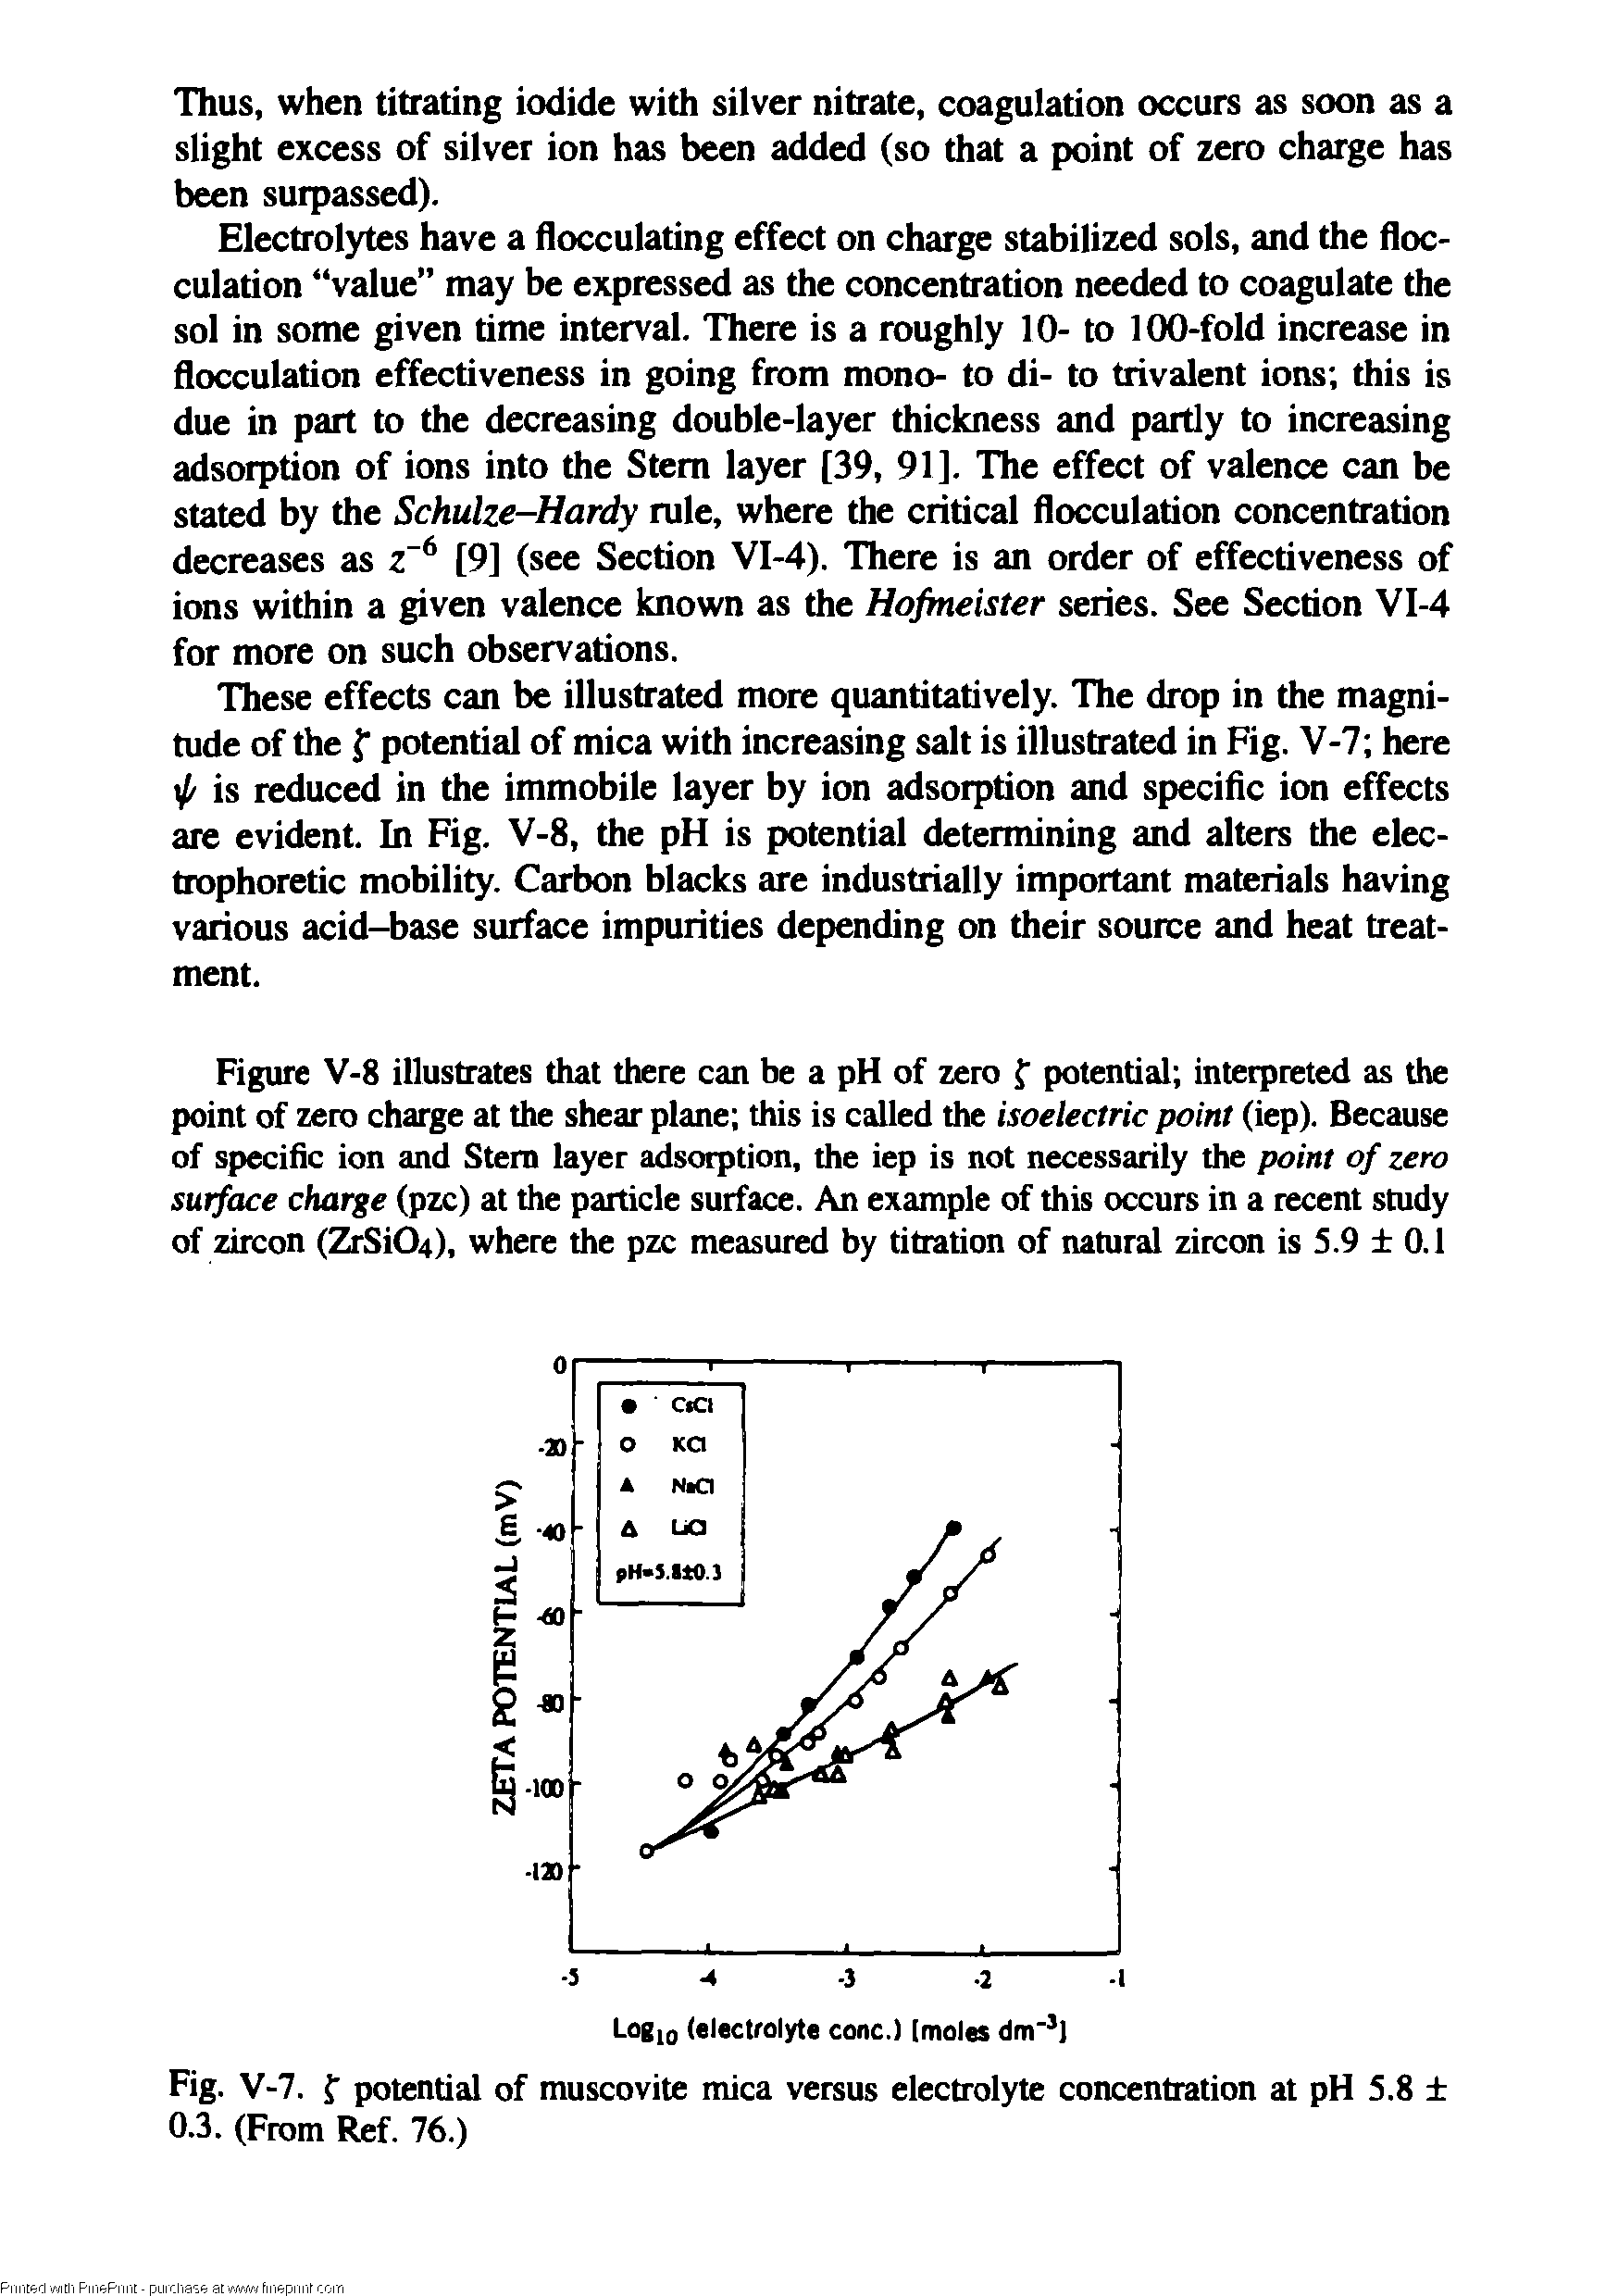 Figure V-8 illustrates that there can be a pH of zero potential interpreted as the point of zero charge at the shear plane this is called the isoelectric point (iep). Because of specific ion and Stem layer adsorption, the iep is not necessarily the point of zero surface charge (pzc) at the particle surface. An example of this occurs in a recent study of zircon (ZrSi04), where the pzc measured by titration of natural zircon is 5.9 0.1...